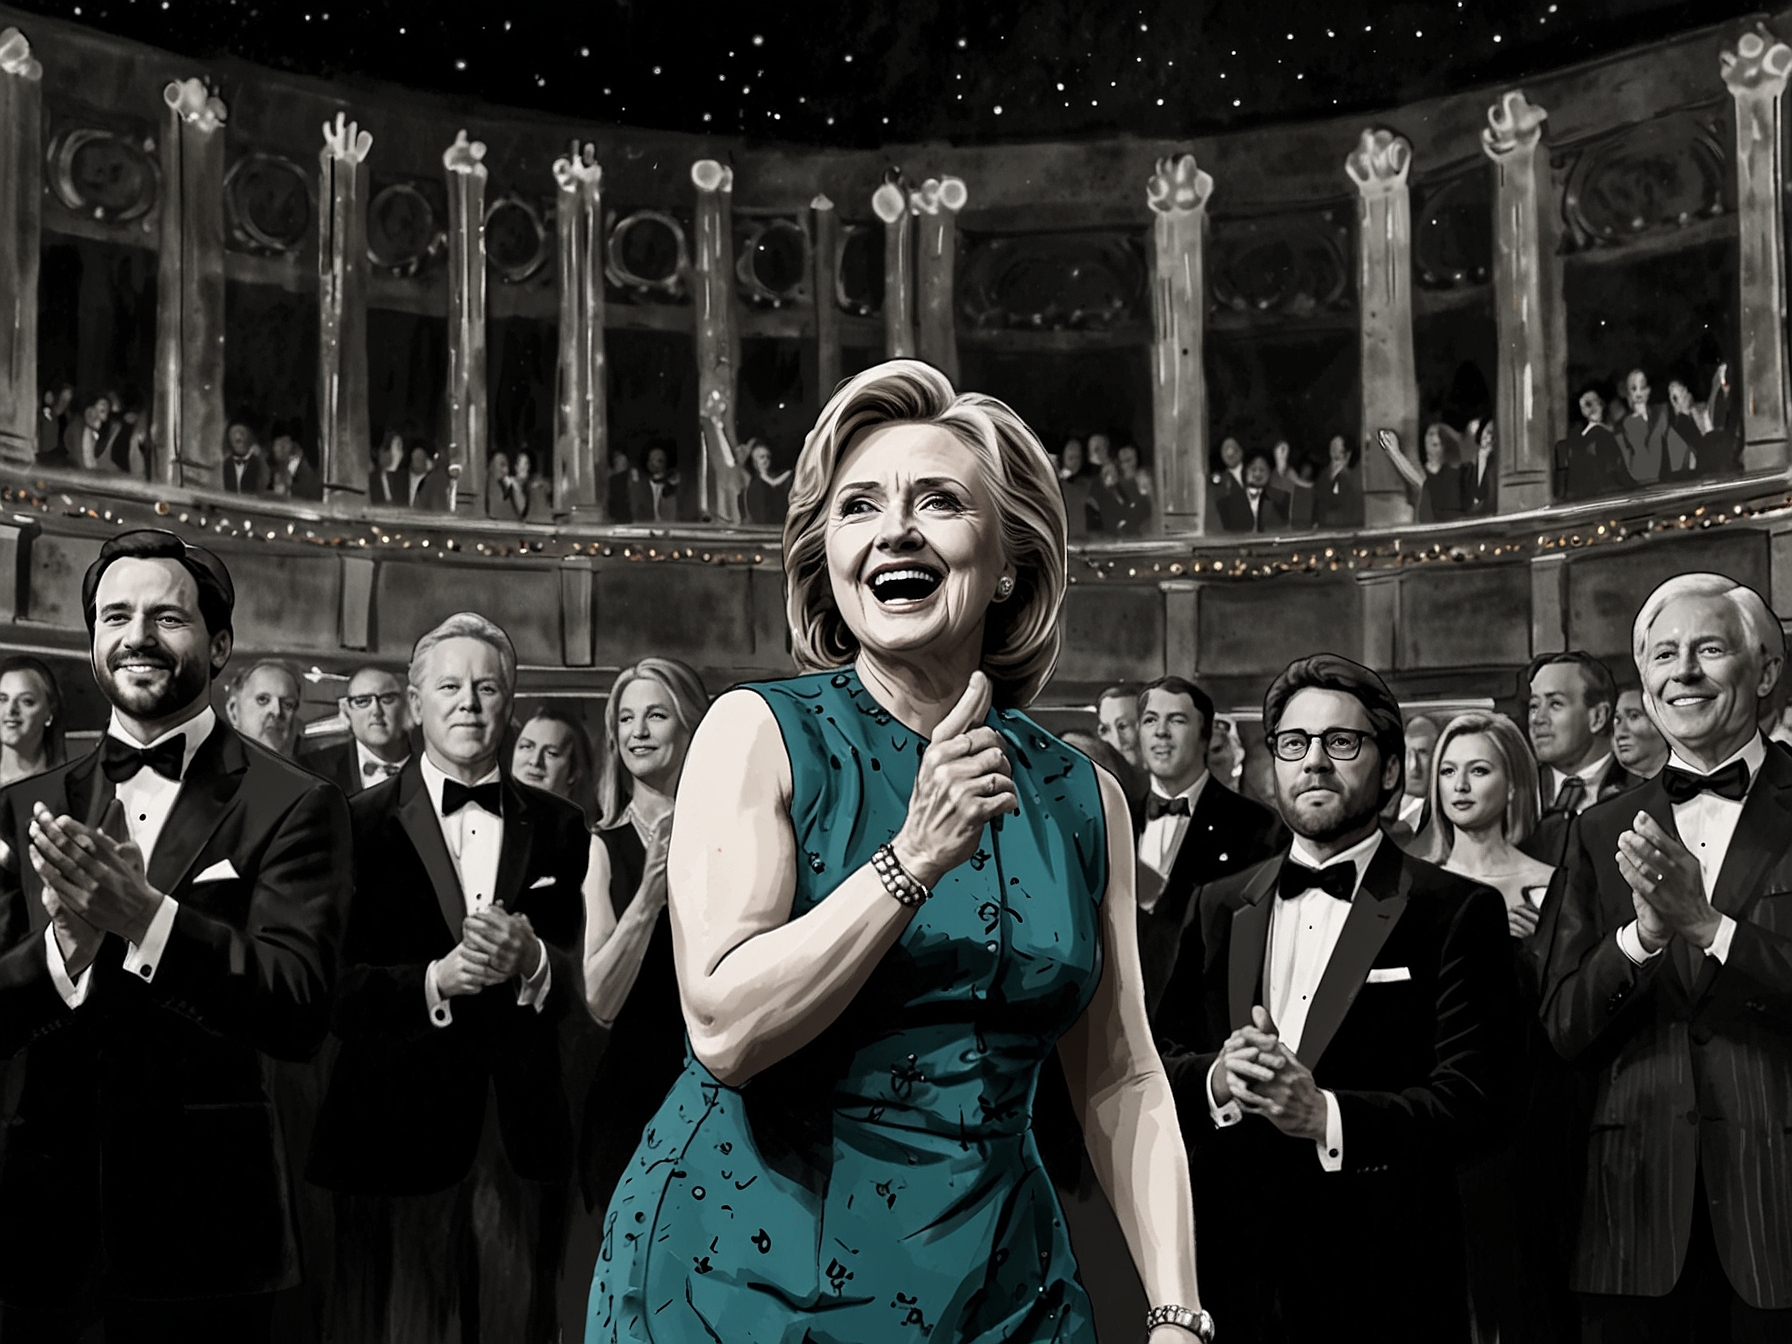 Audience members and theater luminaries applauding Clinton's appearance at the Tony Awards, capturing the division of opinions on her choice to make a political statement during the event.